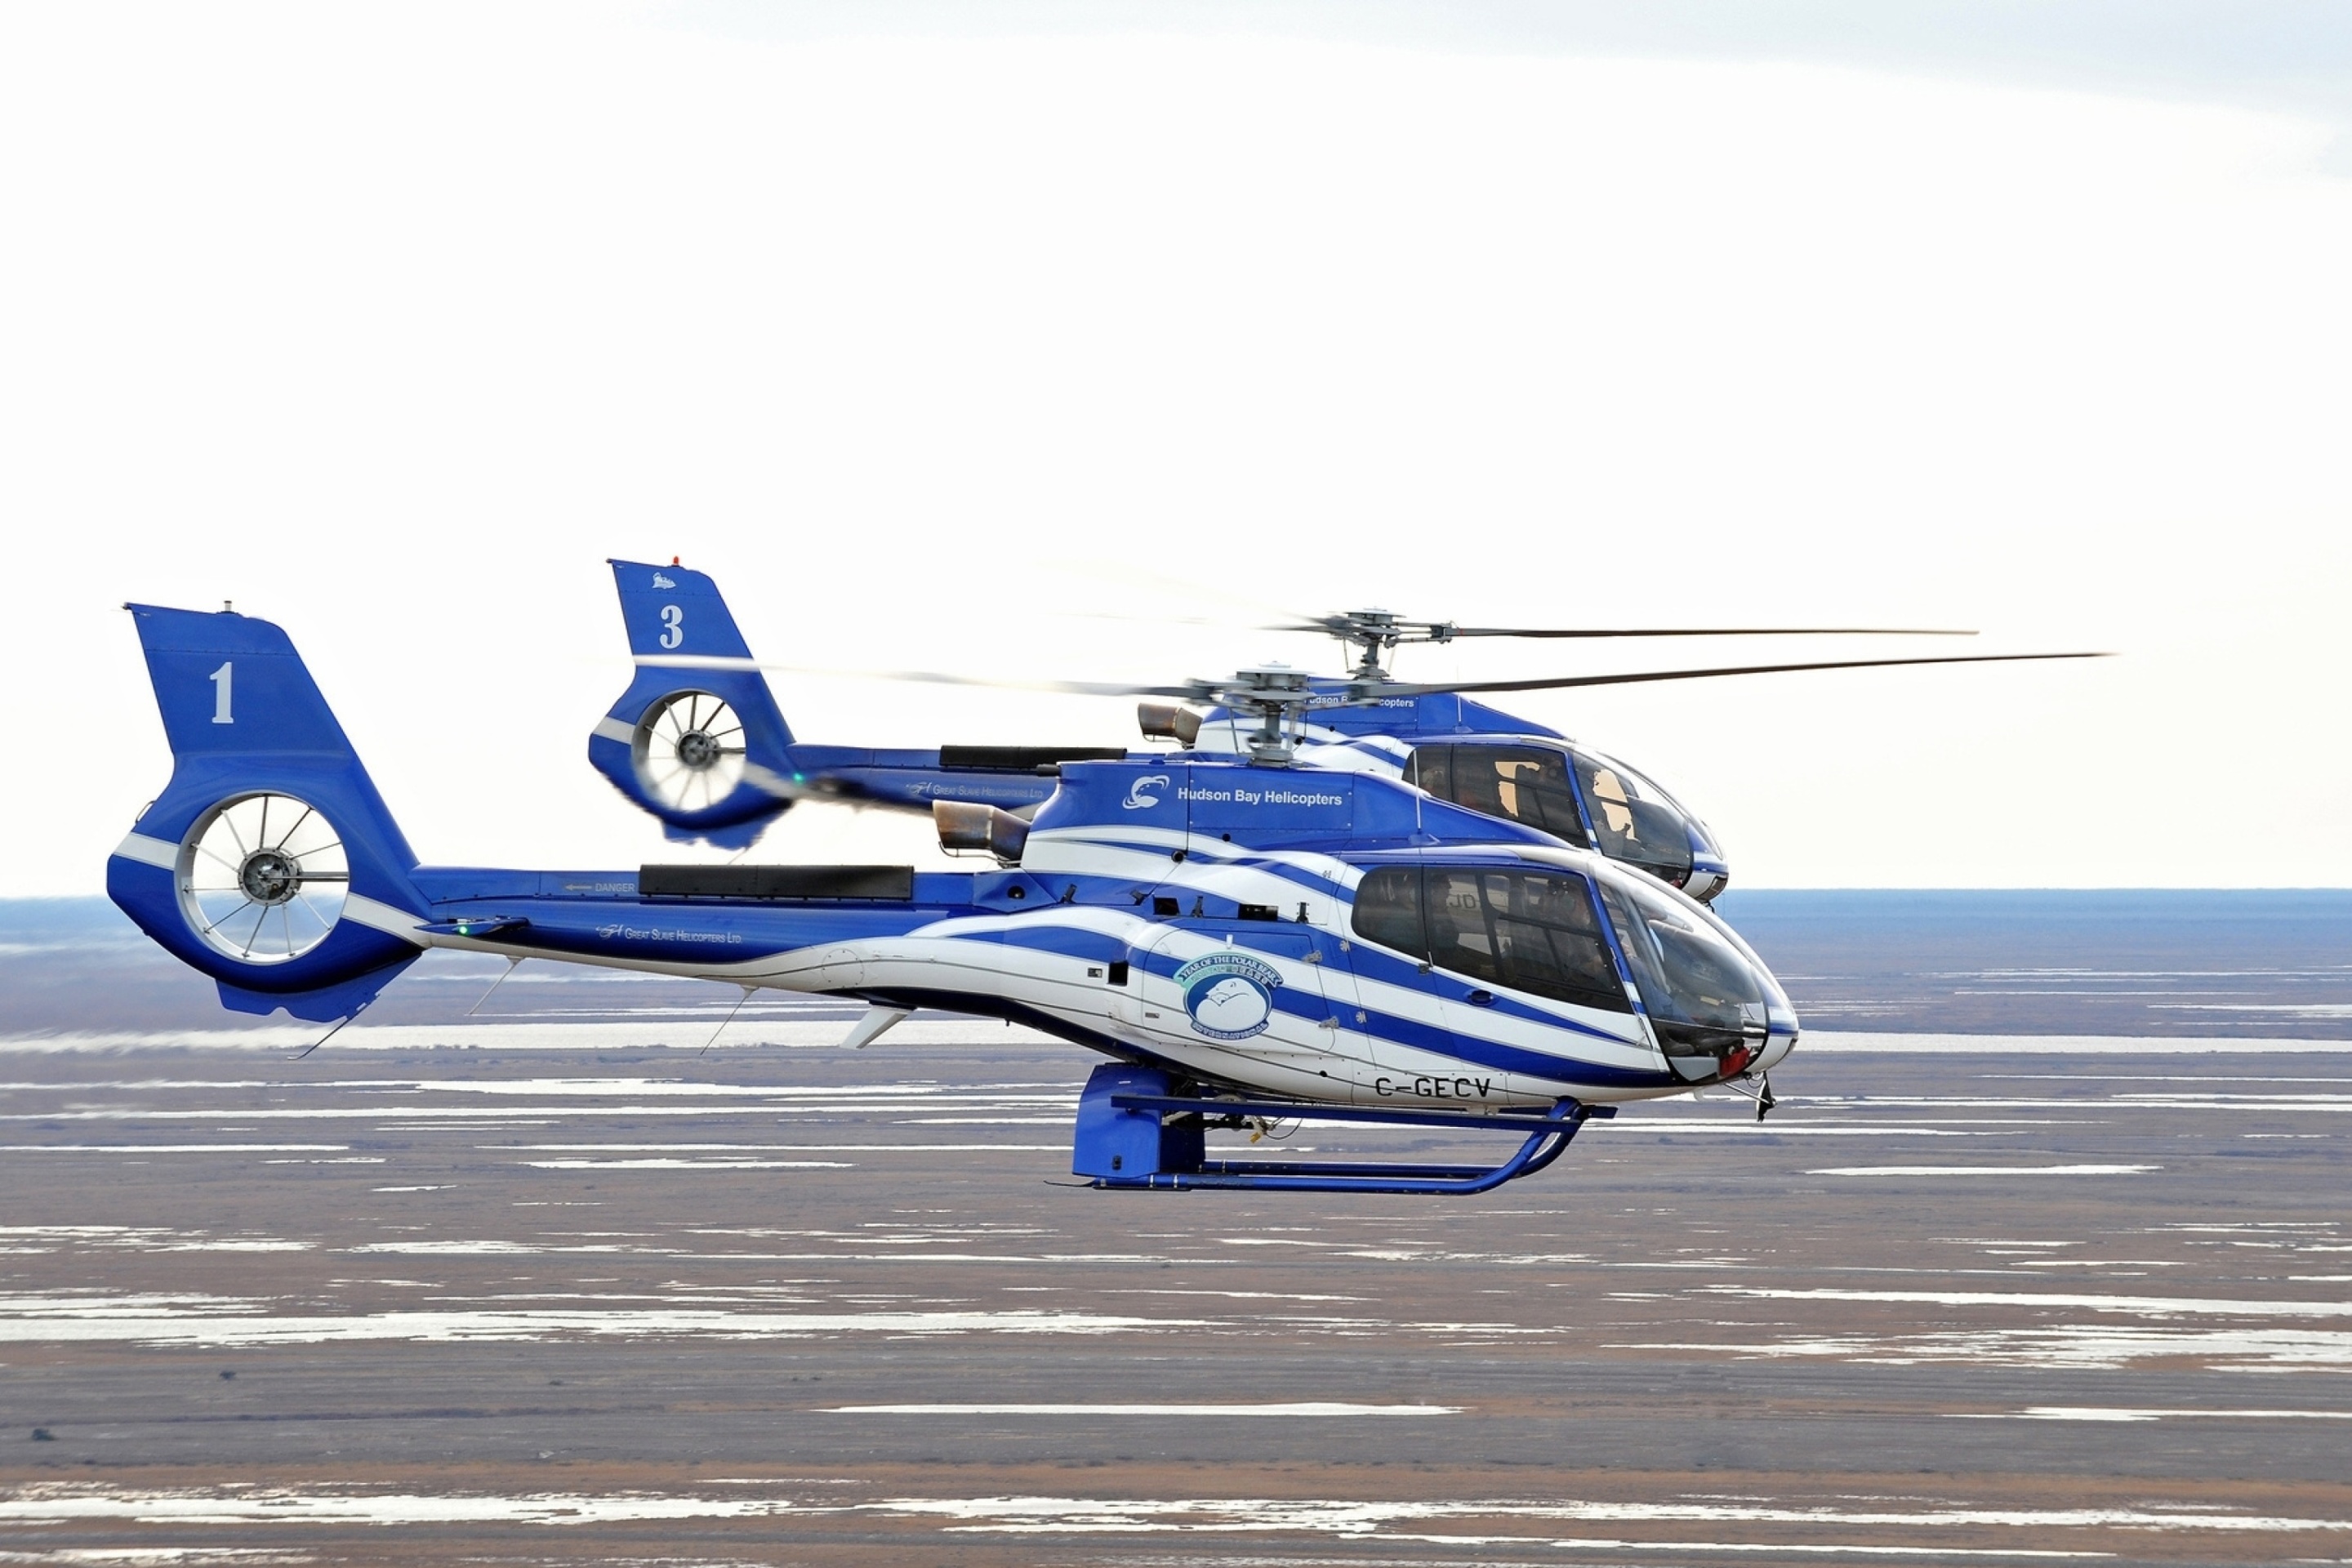 Das Hudson Bay Helicopters Wallpaper 2880x1920